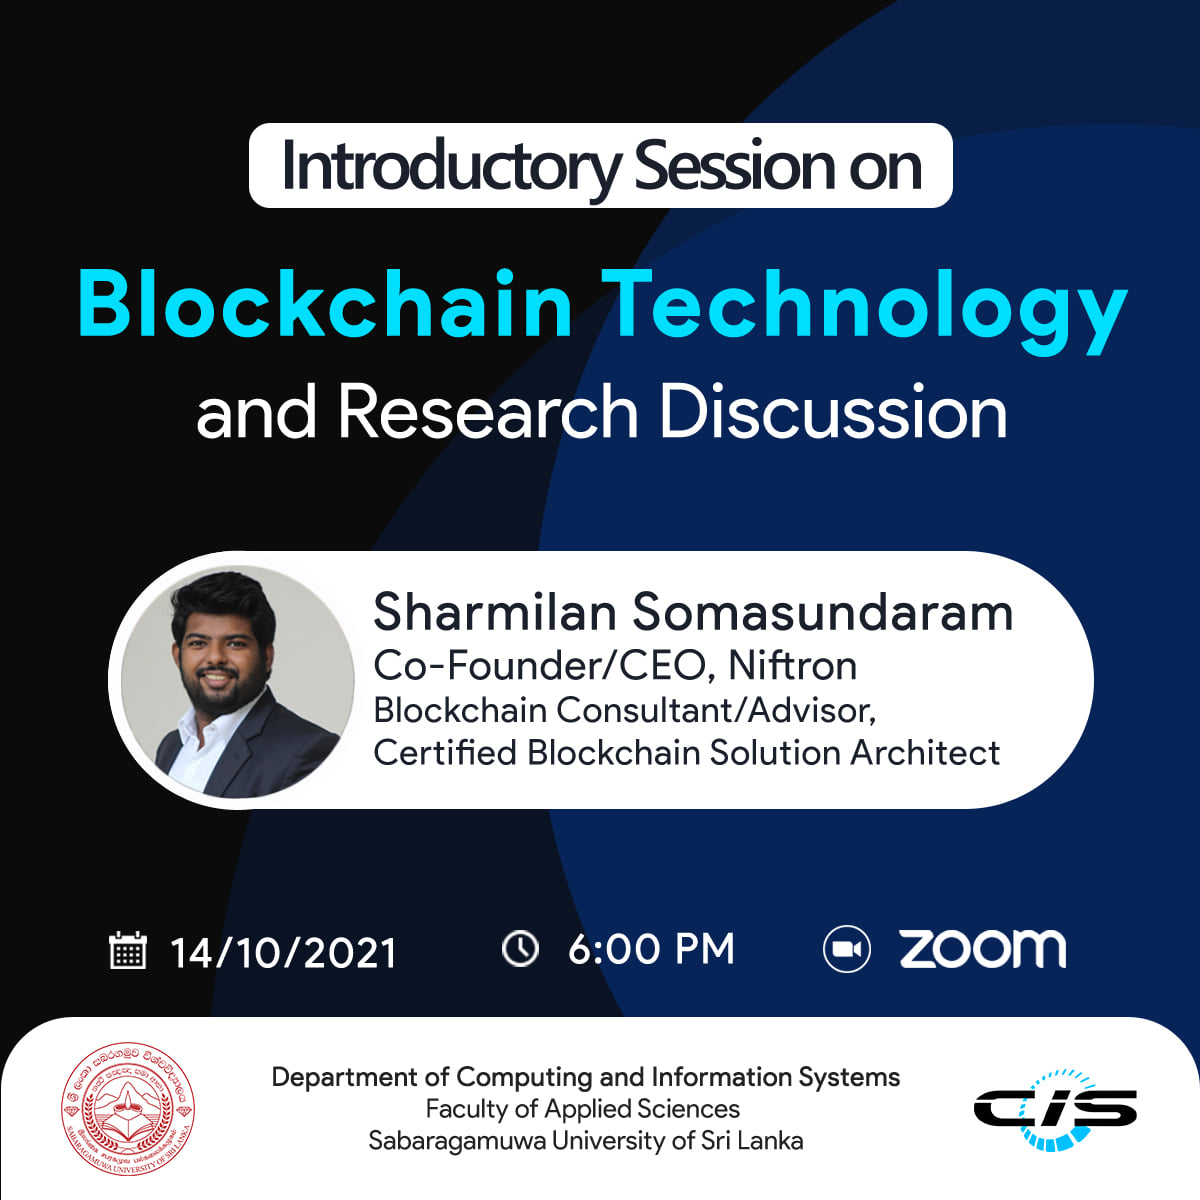  Introductory Session on Blockchain Technology